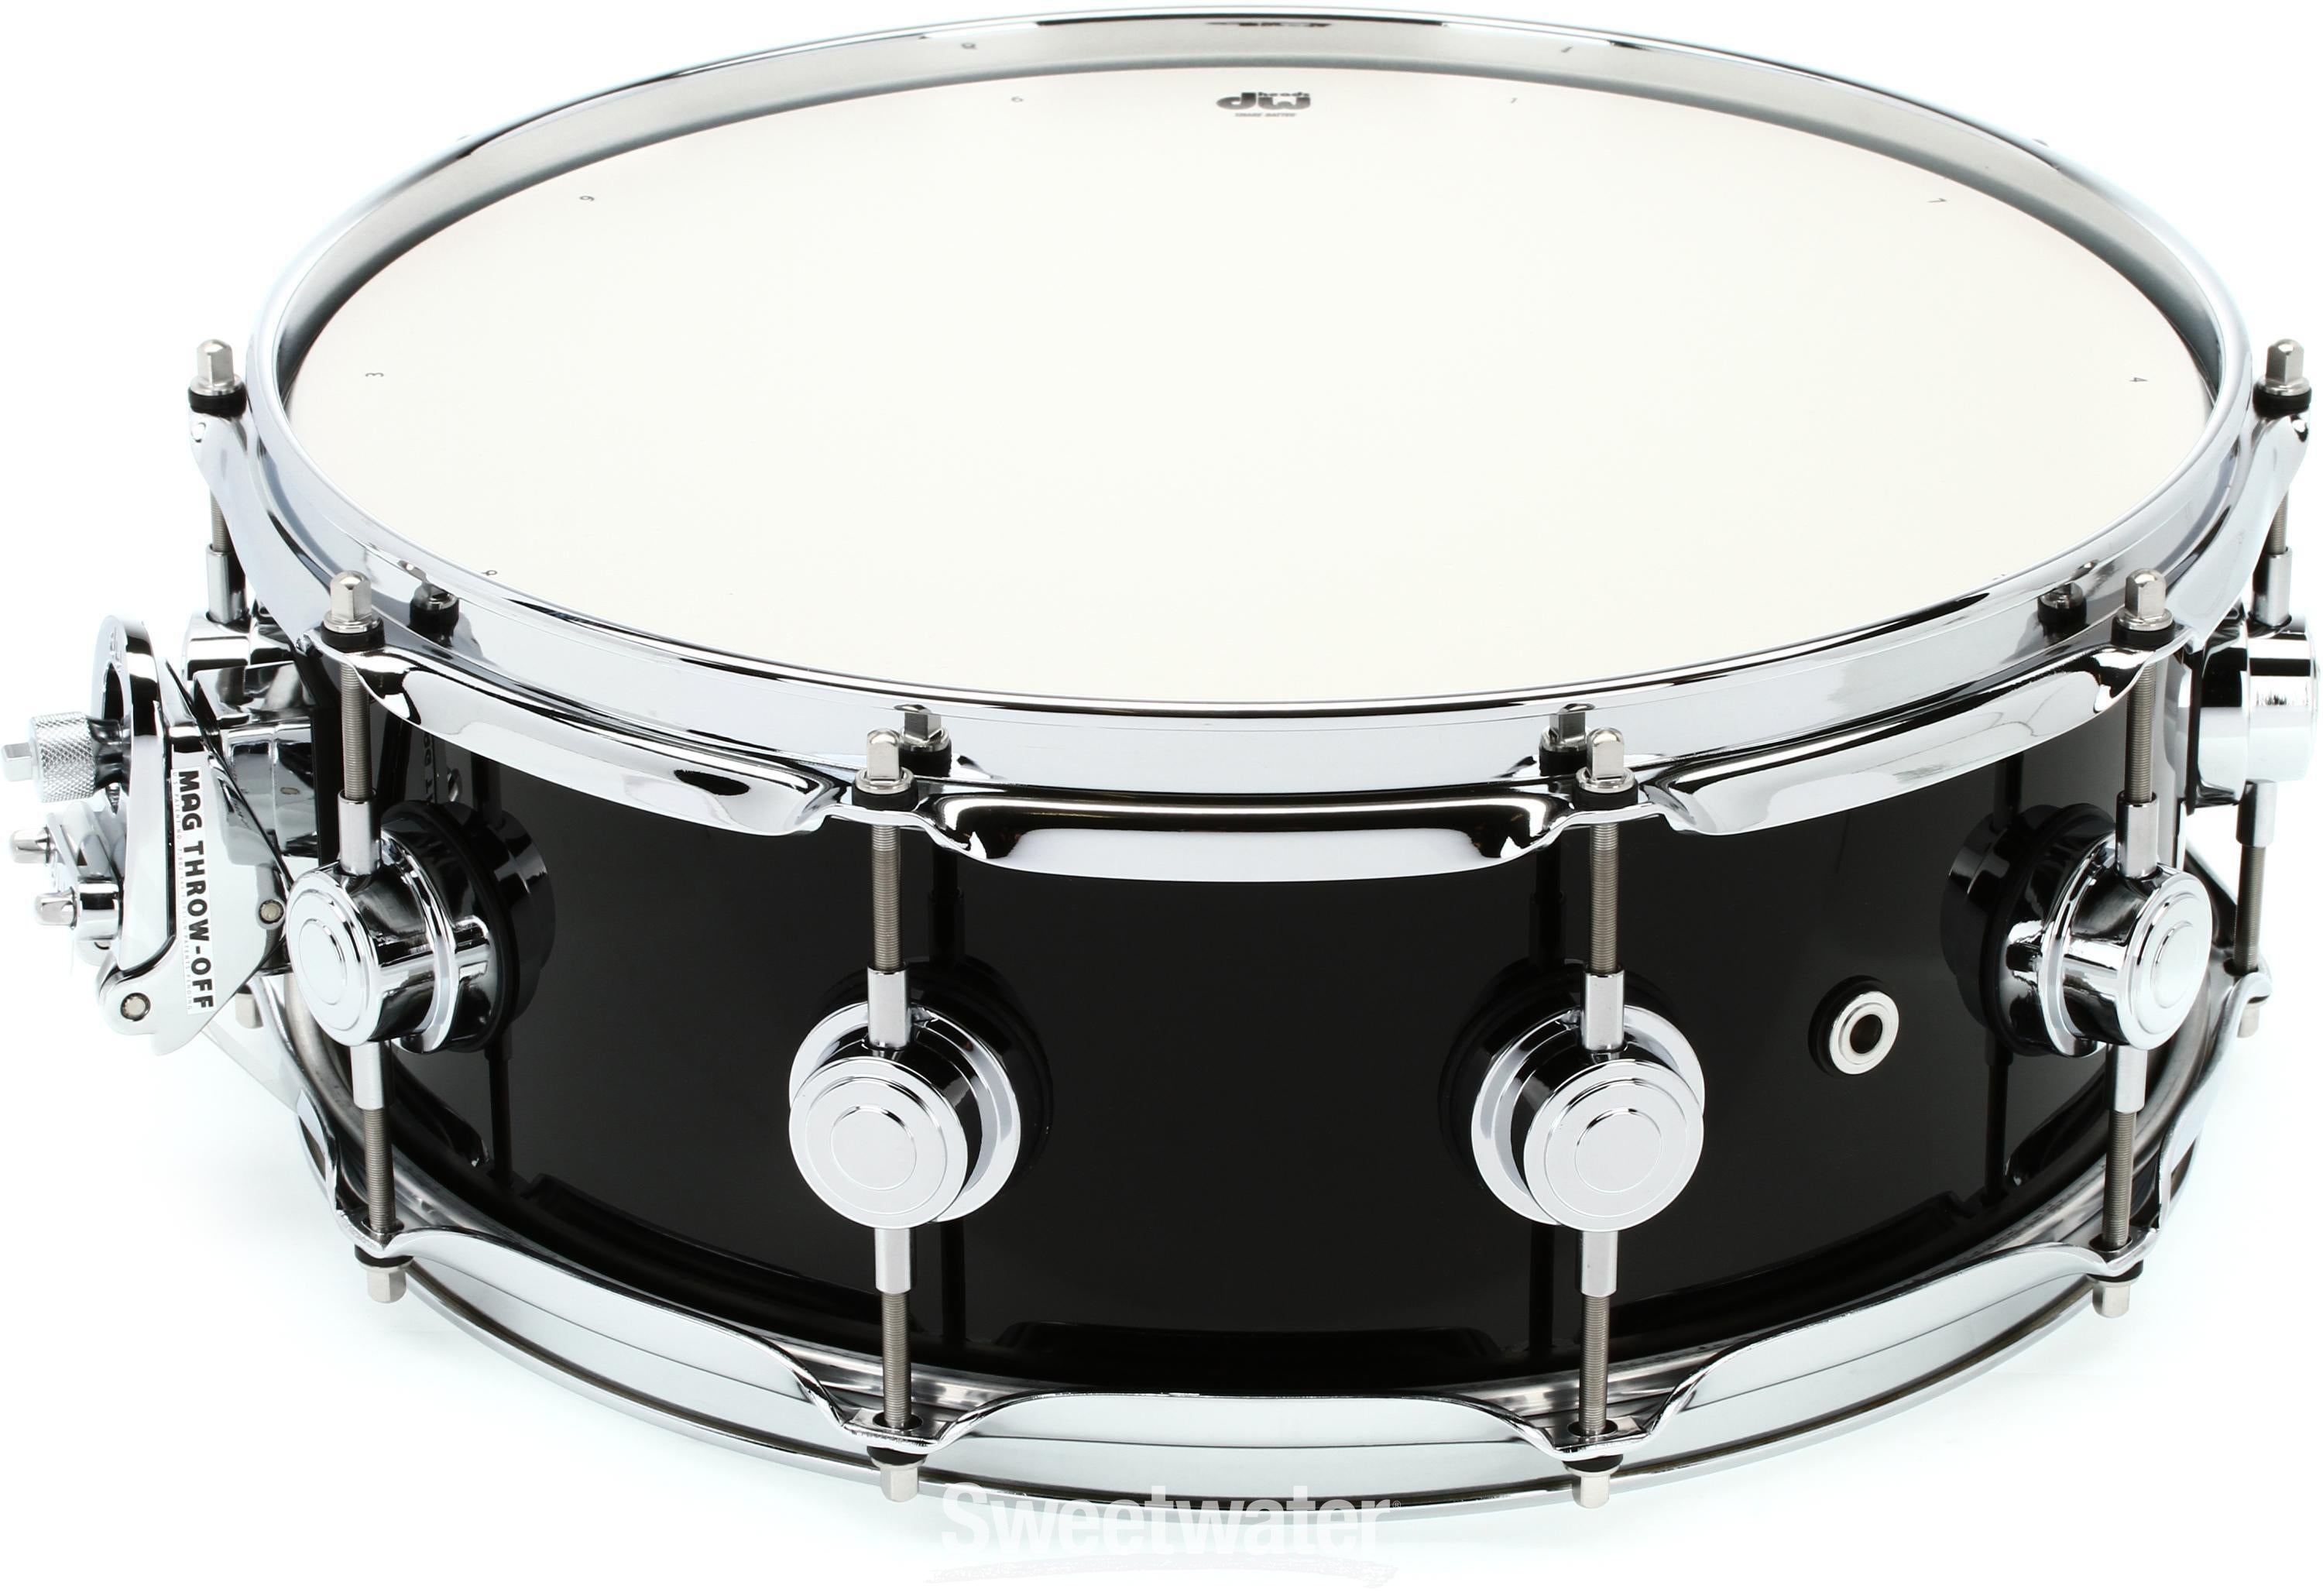 DW Collector's Series Snare Drum - 5 x 14 inch - Solid Black